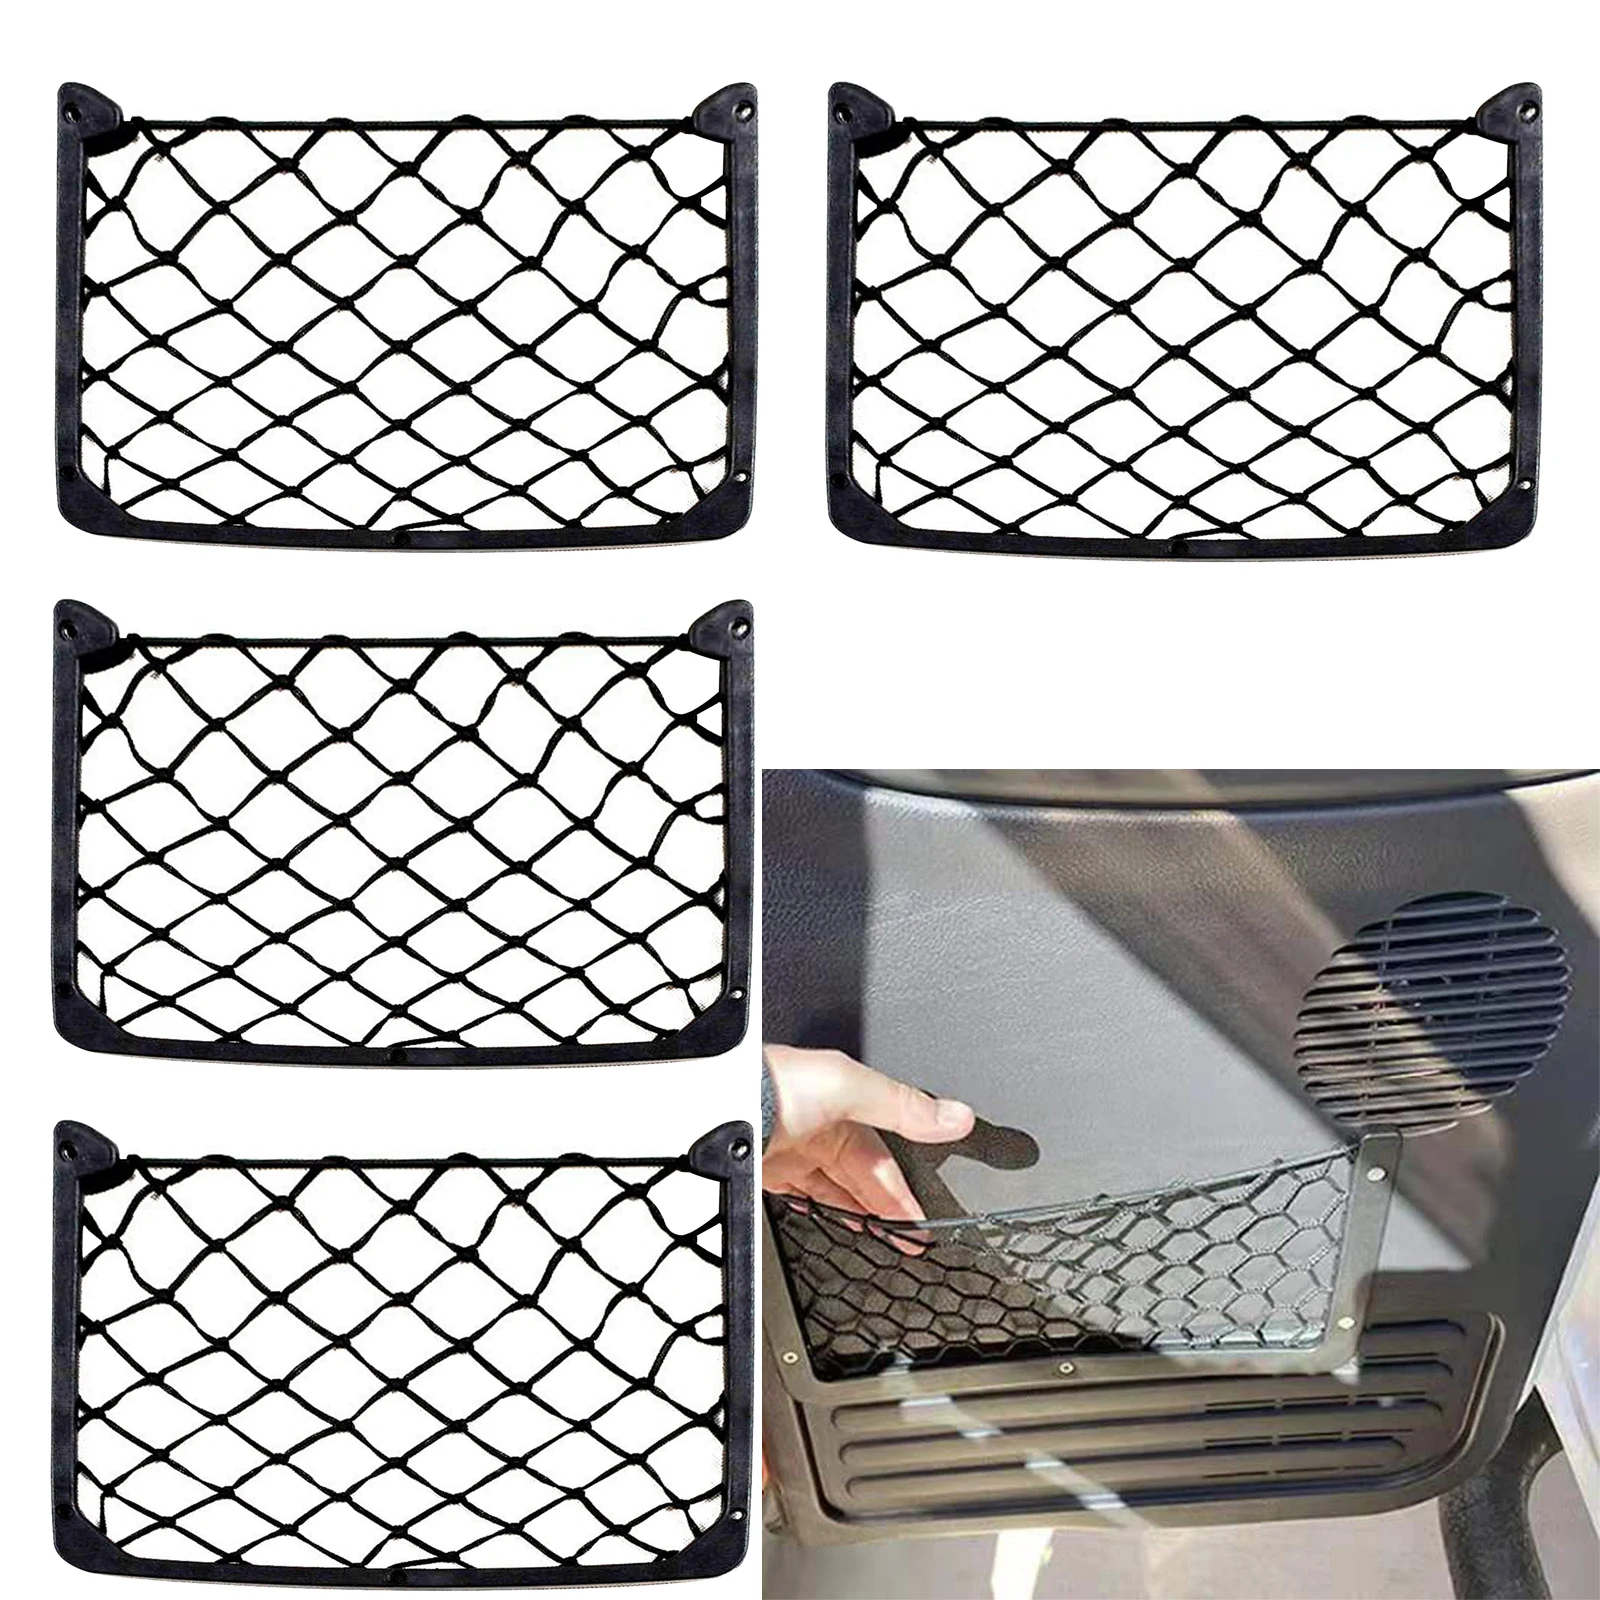 Car Storage Net Large Size ABS Plastic Netting Bag for Car Frame Stretch Mesh Net Universal Cargo with Screws for RV Car Trunk 1pcs gas lens connector brass collets body stubby gas lens connector w mesh tig wp 17 18 26 universal high quality